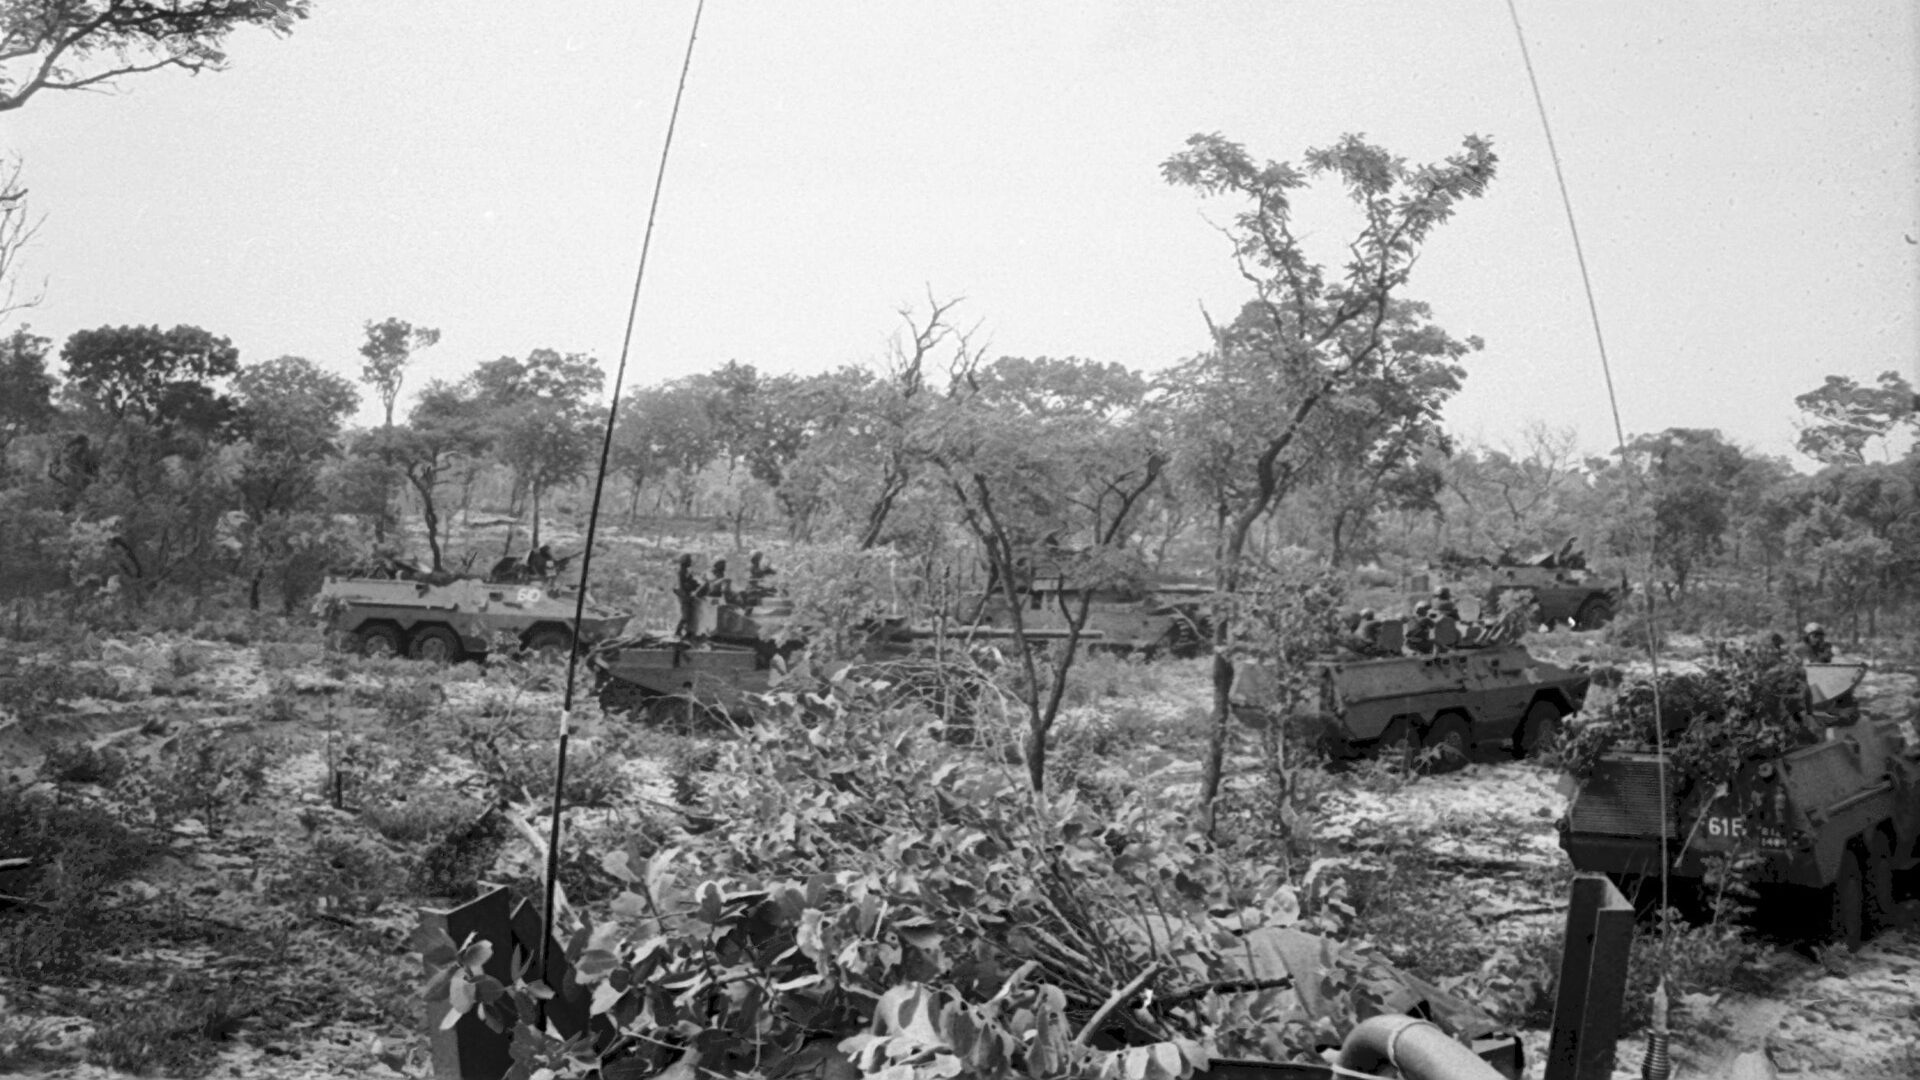 P6 South African mechanized units pummeled Angolan government forces with minimal losses.